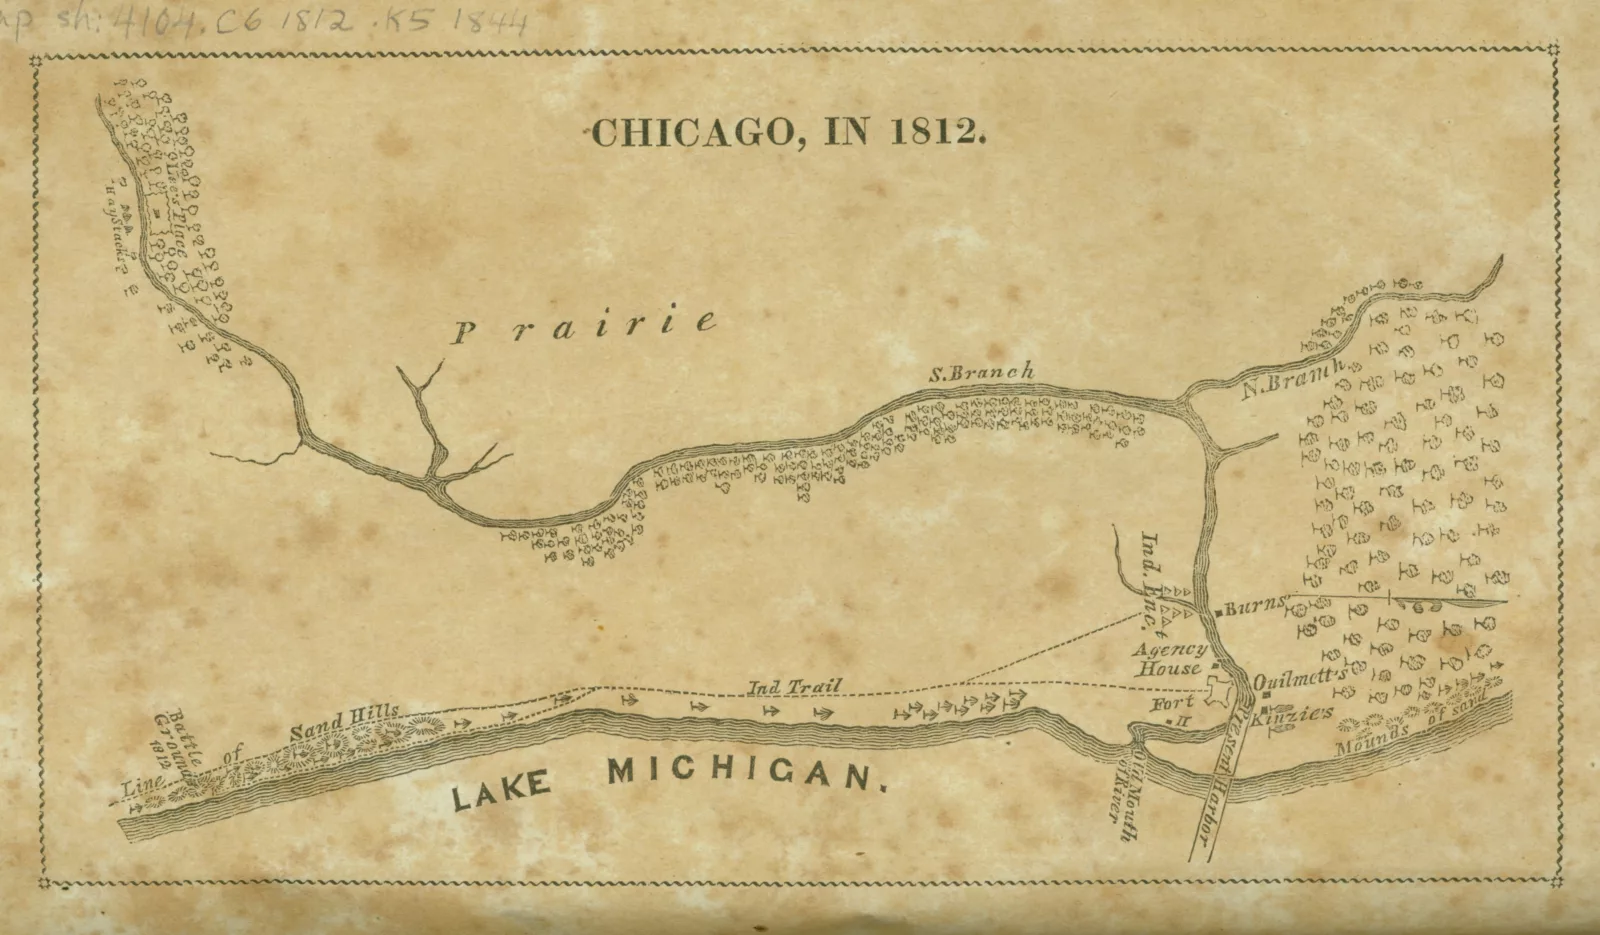 Manuscript map that depicts empty land with a river running through. At the top is the title "Chicago, in 1812." Map labels indicate the prairie and Lake Michigan.